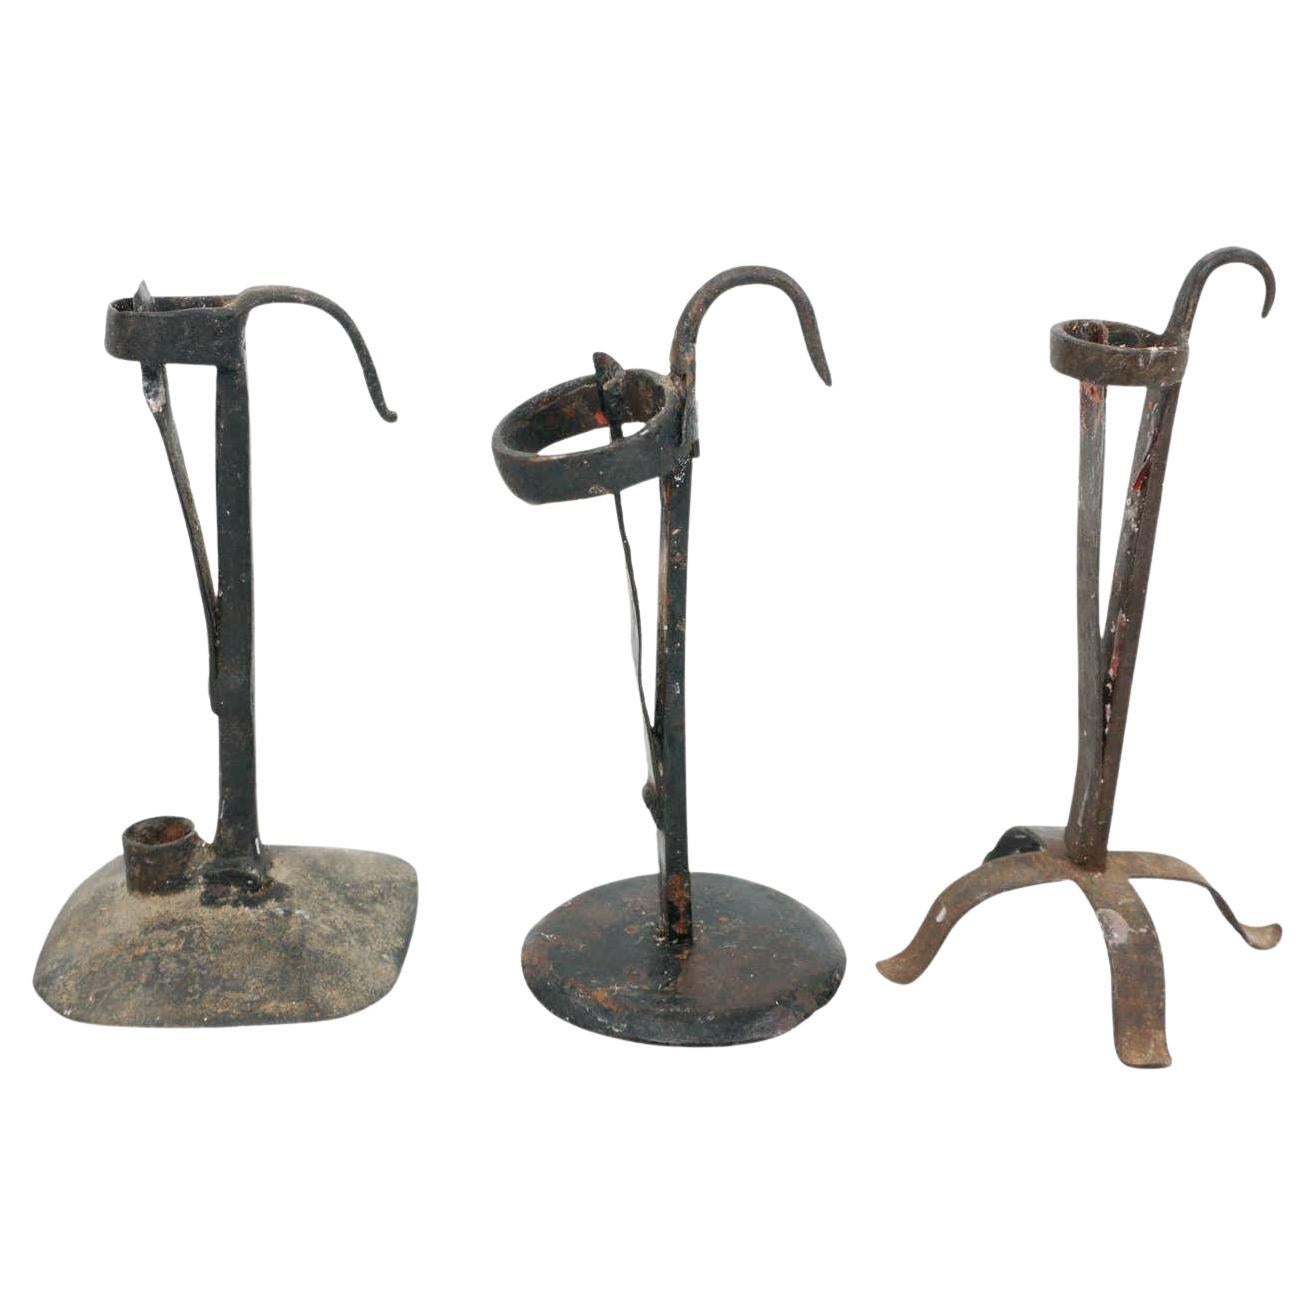 Set of Three Rustic Metal Candle Holders, circa 1930 For Sale